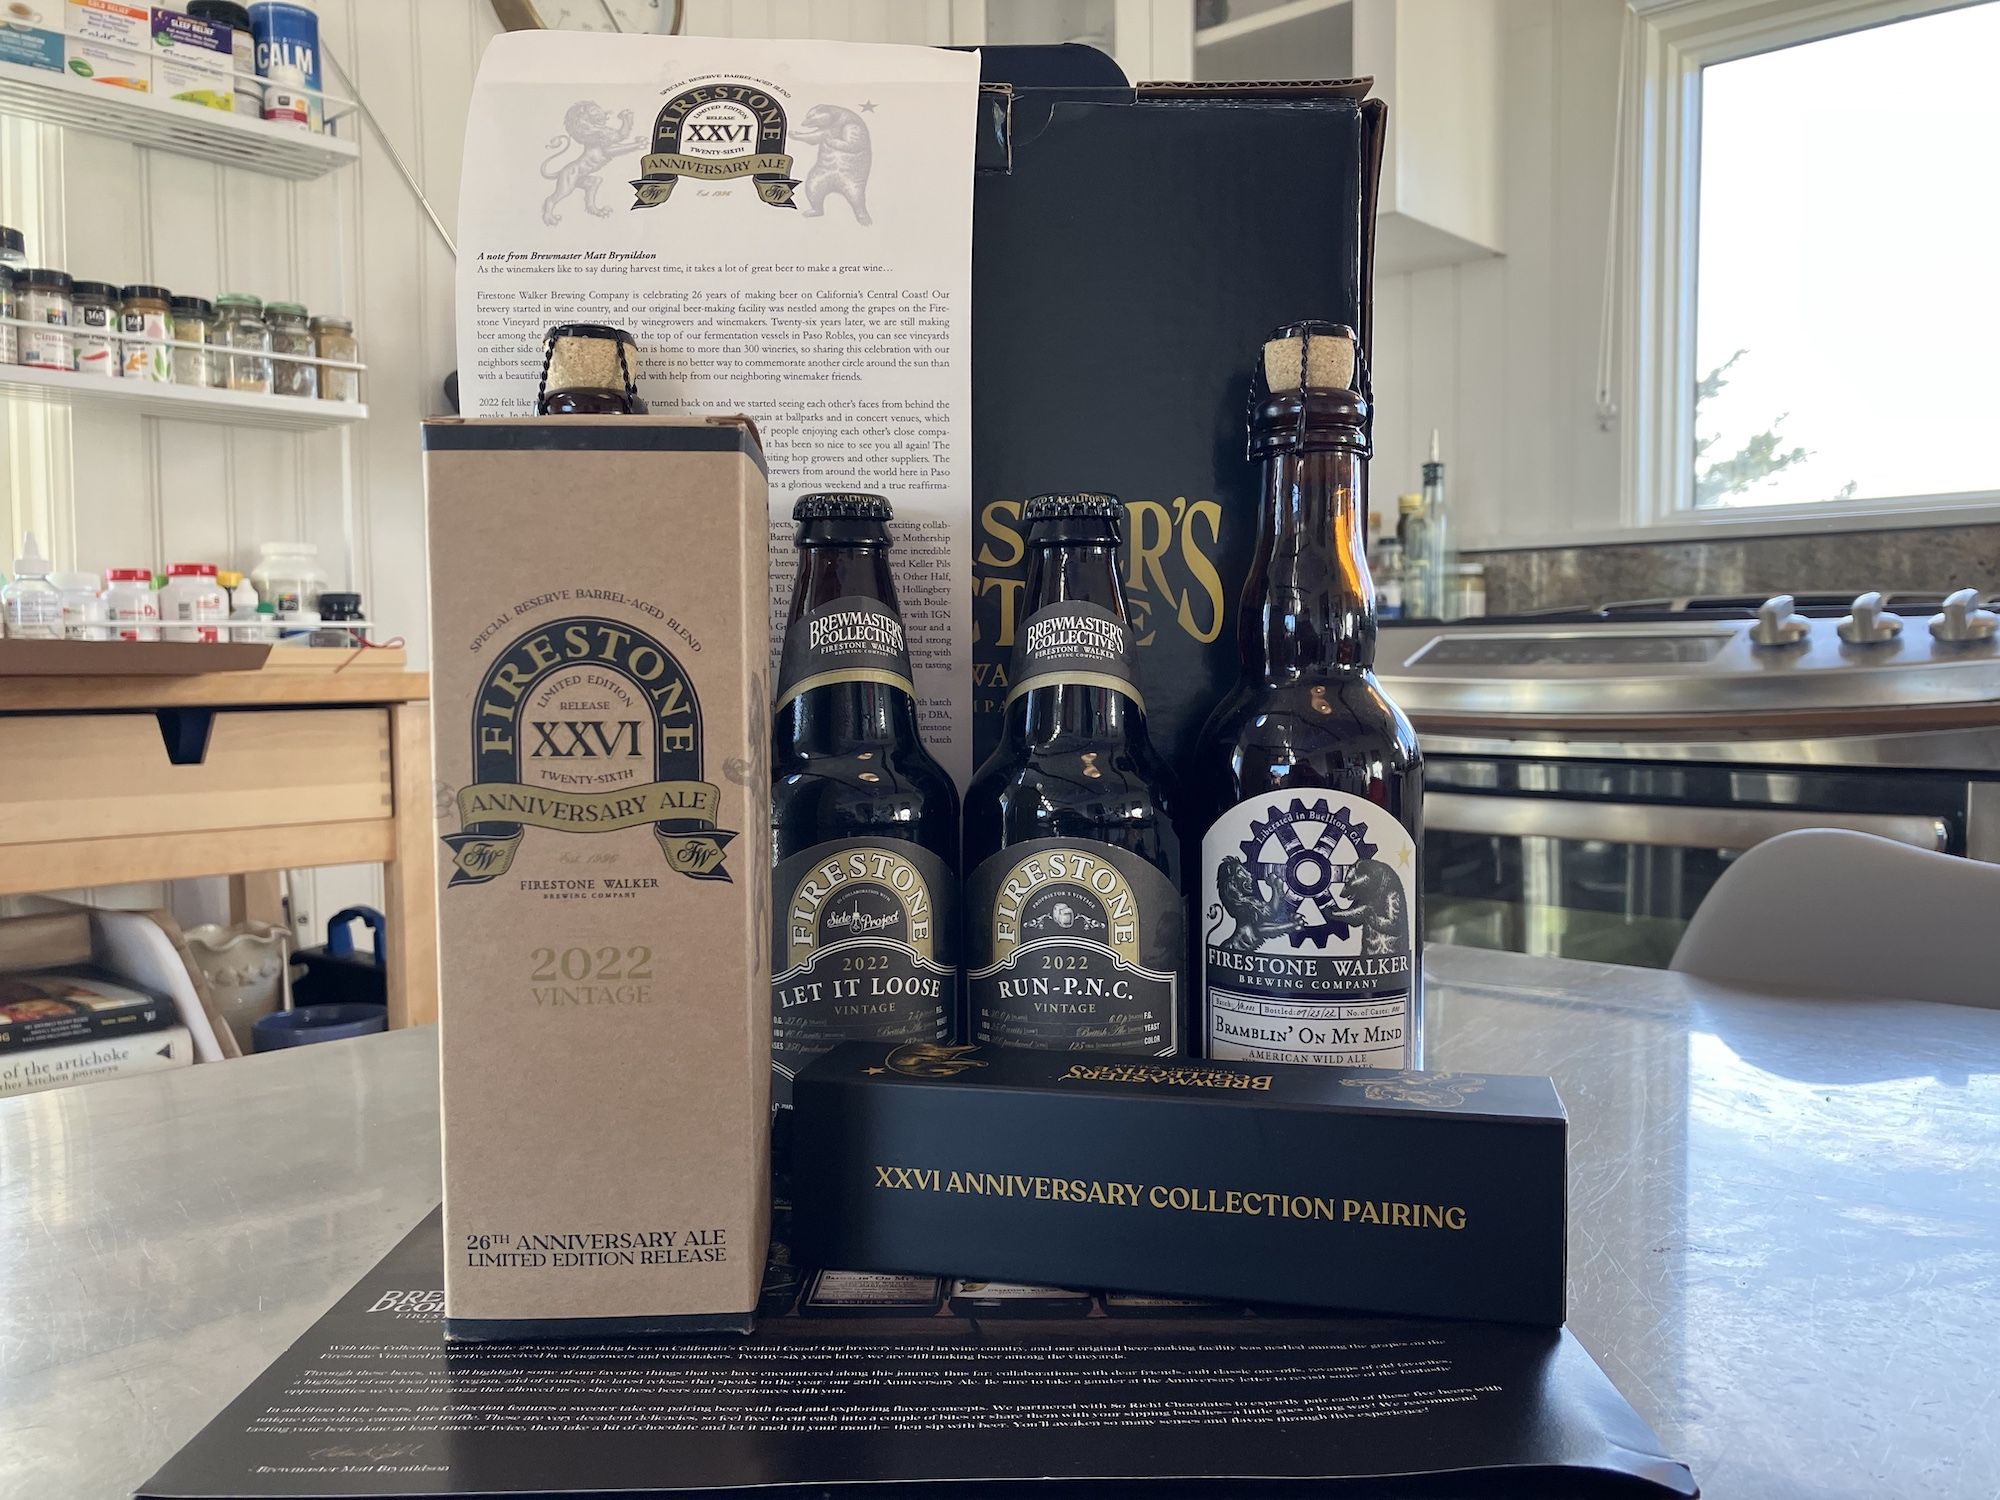 Brewmaster's Collective X YETI Colster – Firestone Walker Brewing Company